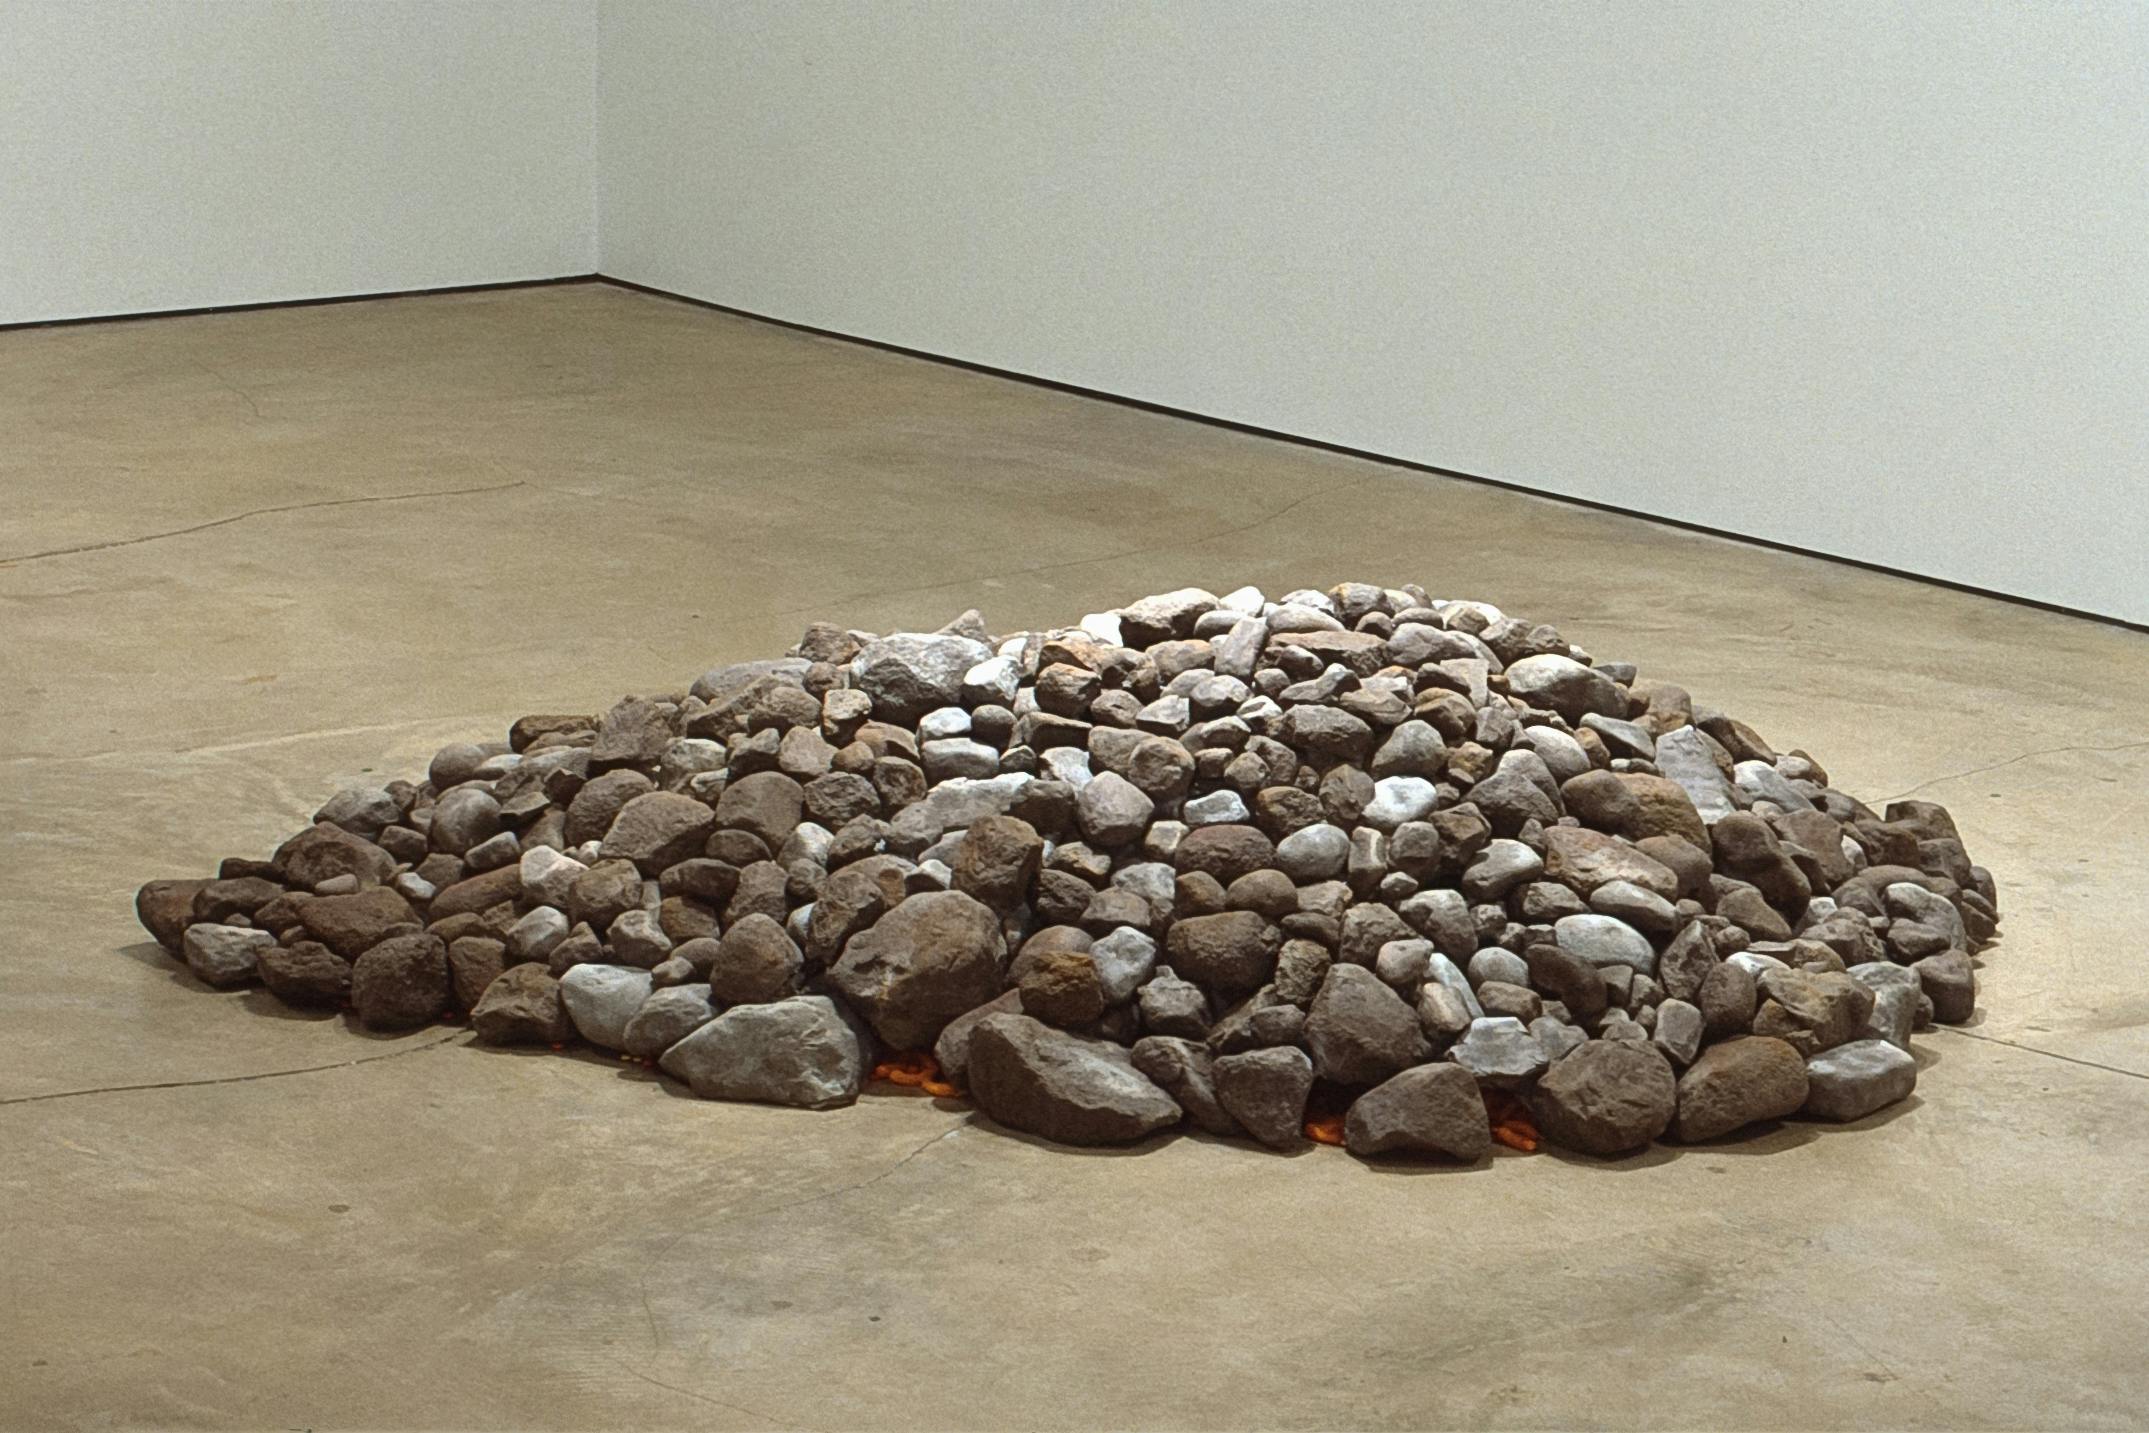 A pile of small rocks and stones is placed on the gallery floor. The pile is quite low. A layer of orange strings, which seems to be either ropes or fried snacks, are visible under the rocks. 